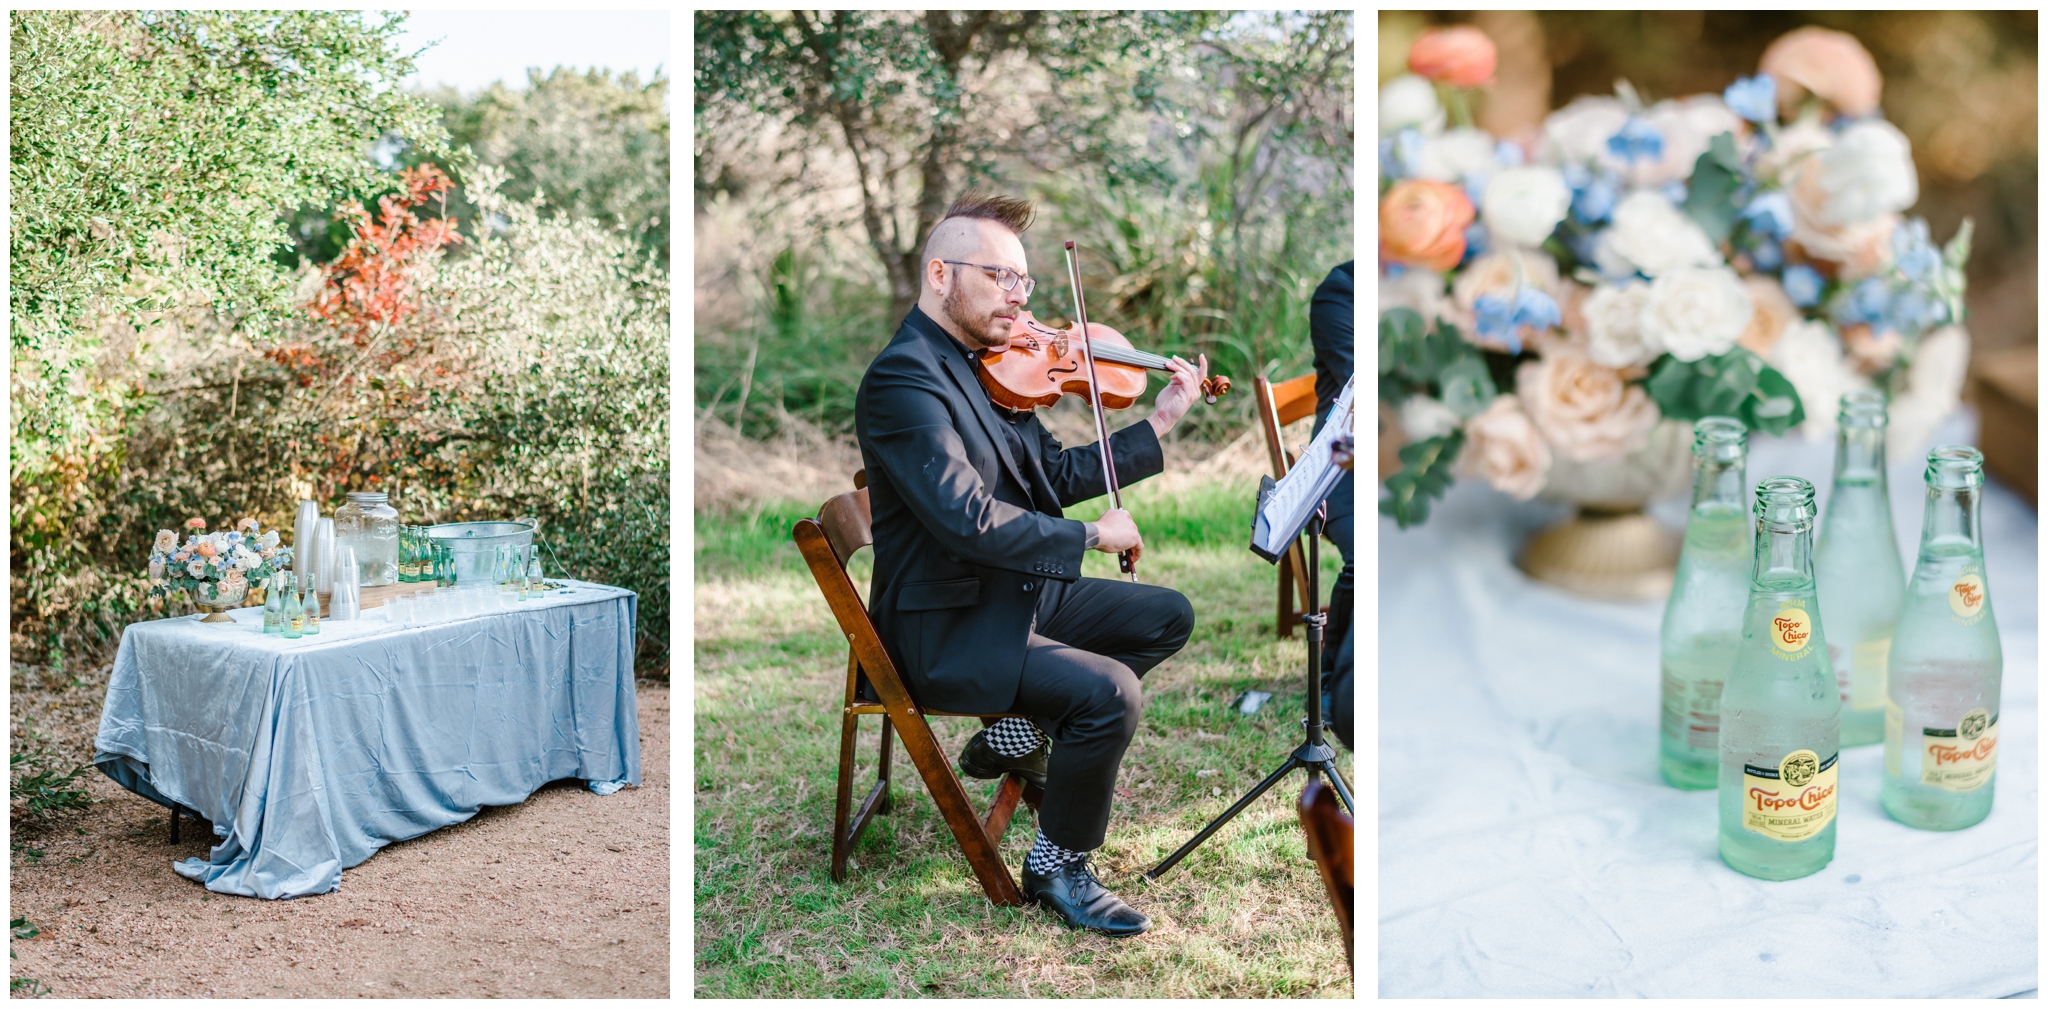 Fall wedding ceremony at The Greenhouse at Driftwood in Austin Texas | Joslyn Holtfort Photography